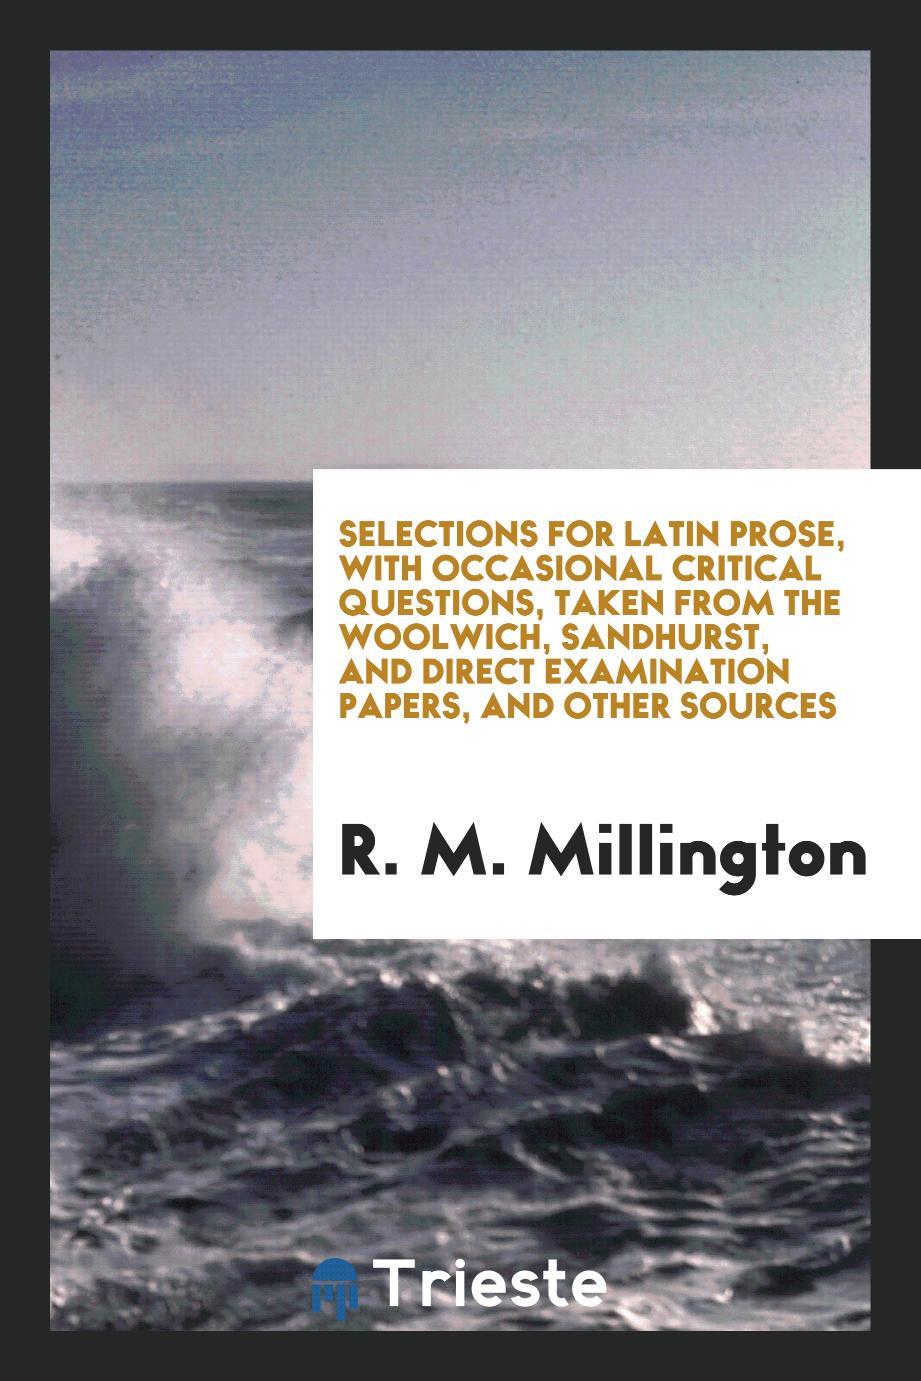 Selections for Latin prose, with Occasional Critical Questions, taken from the woolwich, sandhurst, and direct examination papers, and other sources